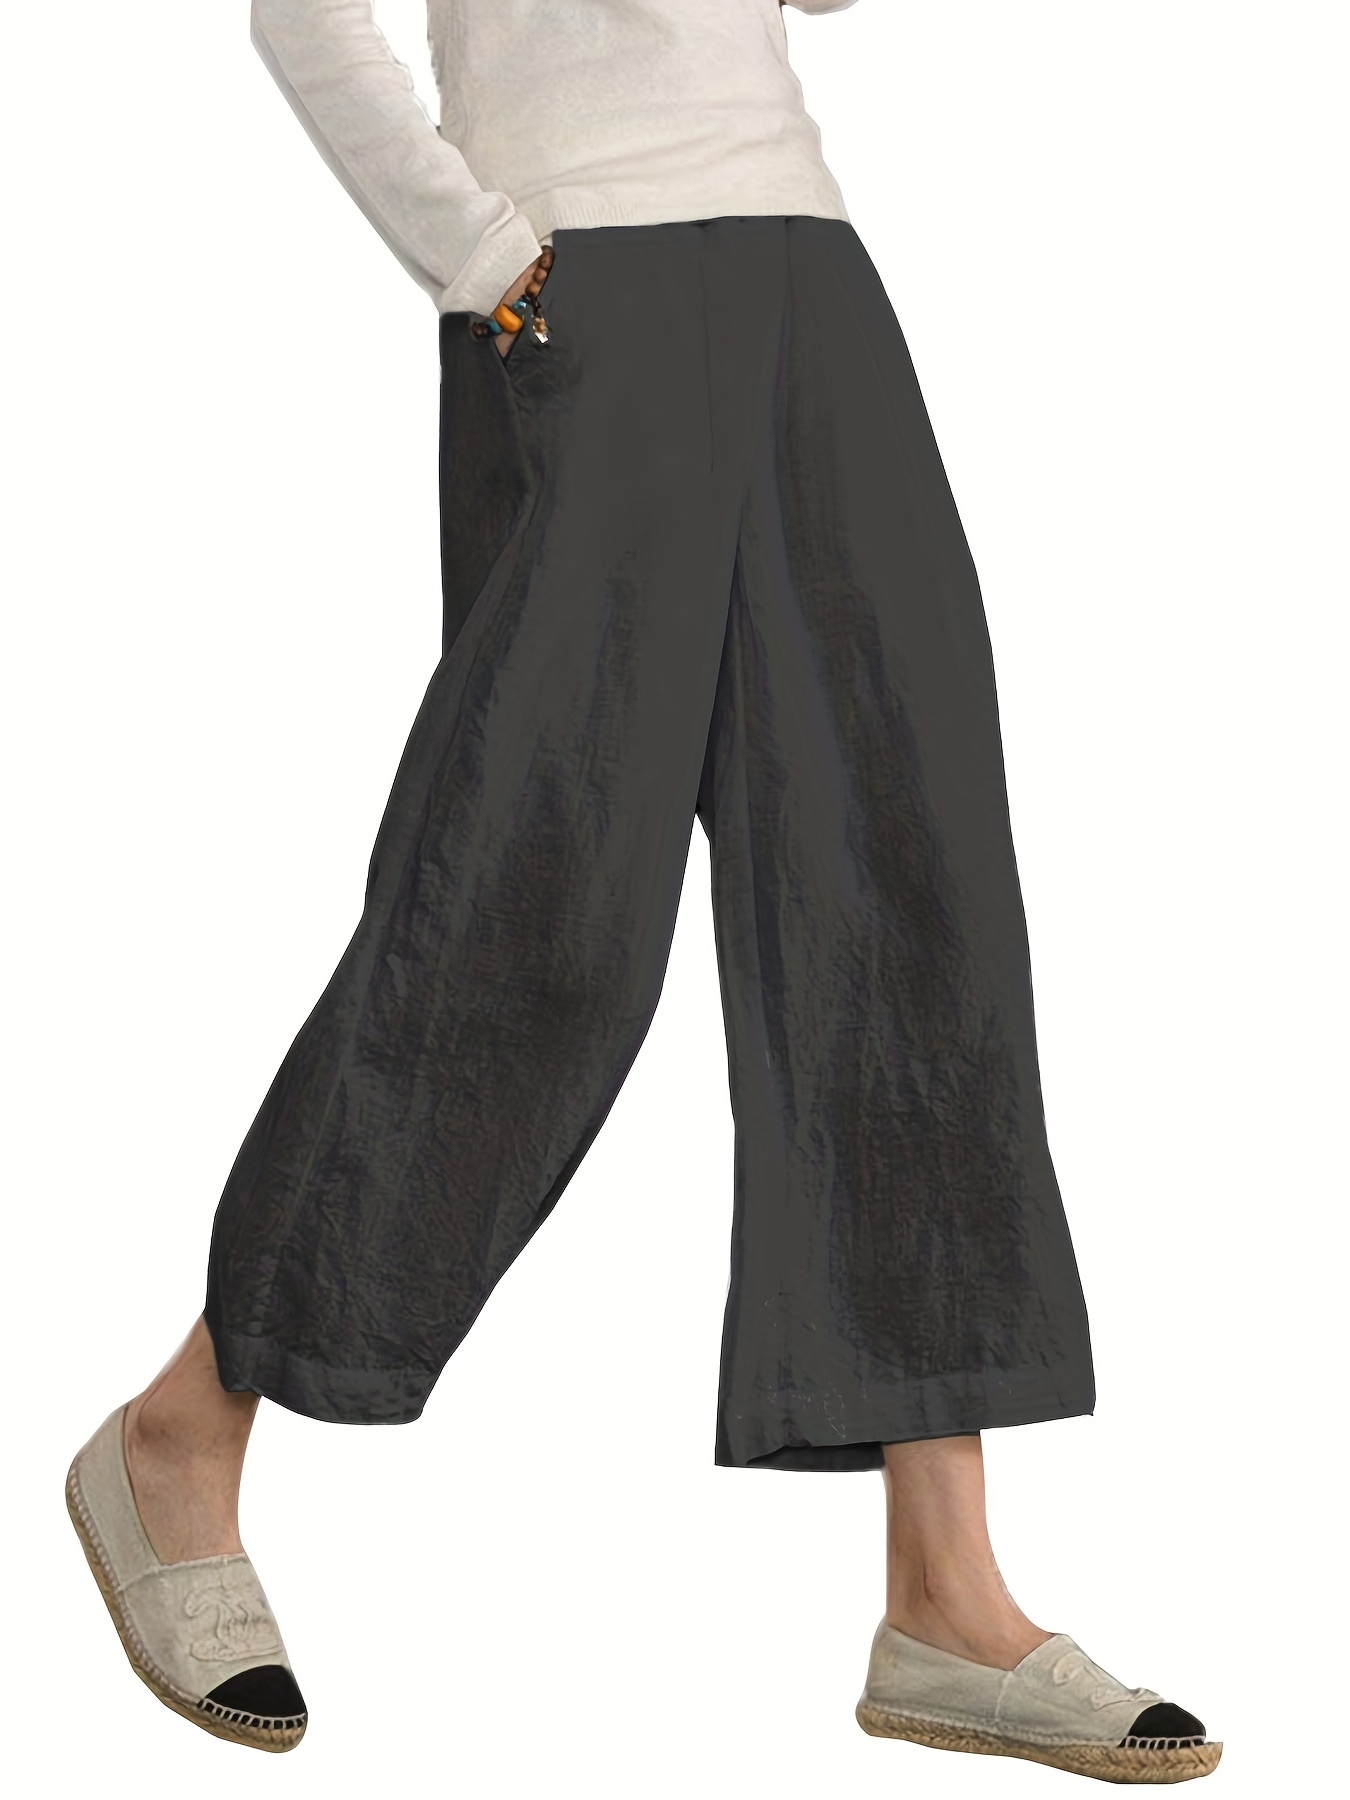 Solid & Casual Elastic Capri Pants, Casual Every Day Pants, Women's Clothing